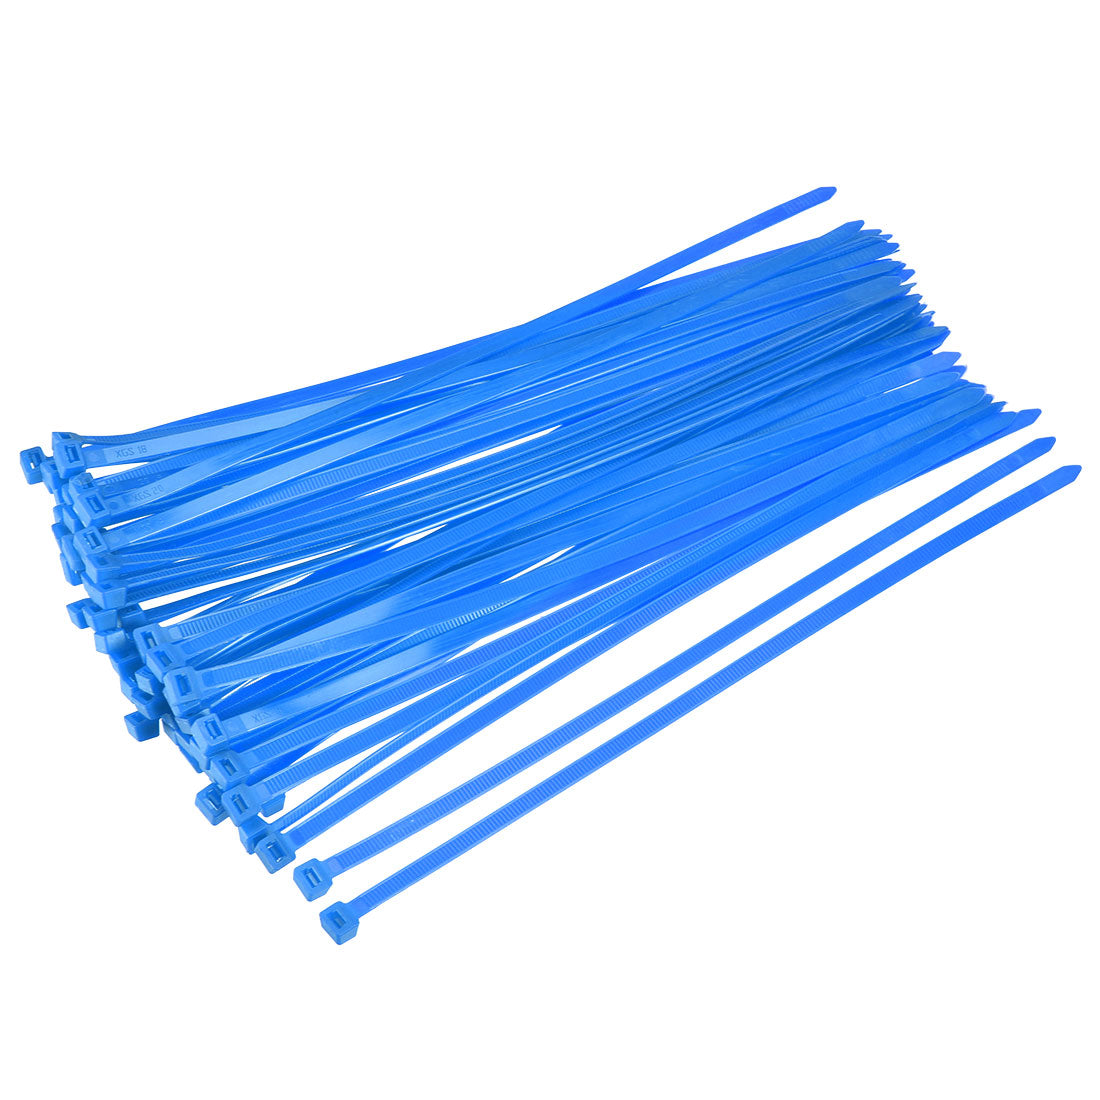 uxcell Uxcell Cable Zip Ties 200mmx4.8mm Self-Locking Nylon Tie Wraps Blue 40pcs